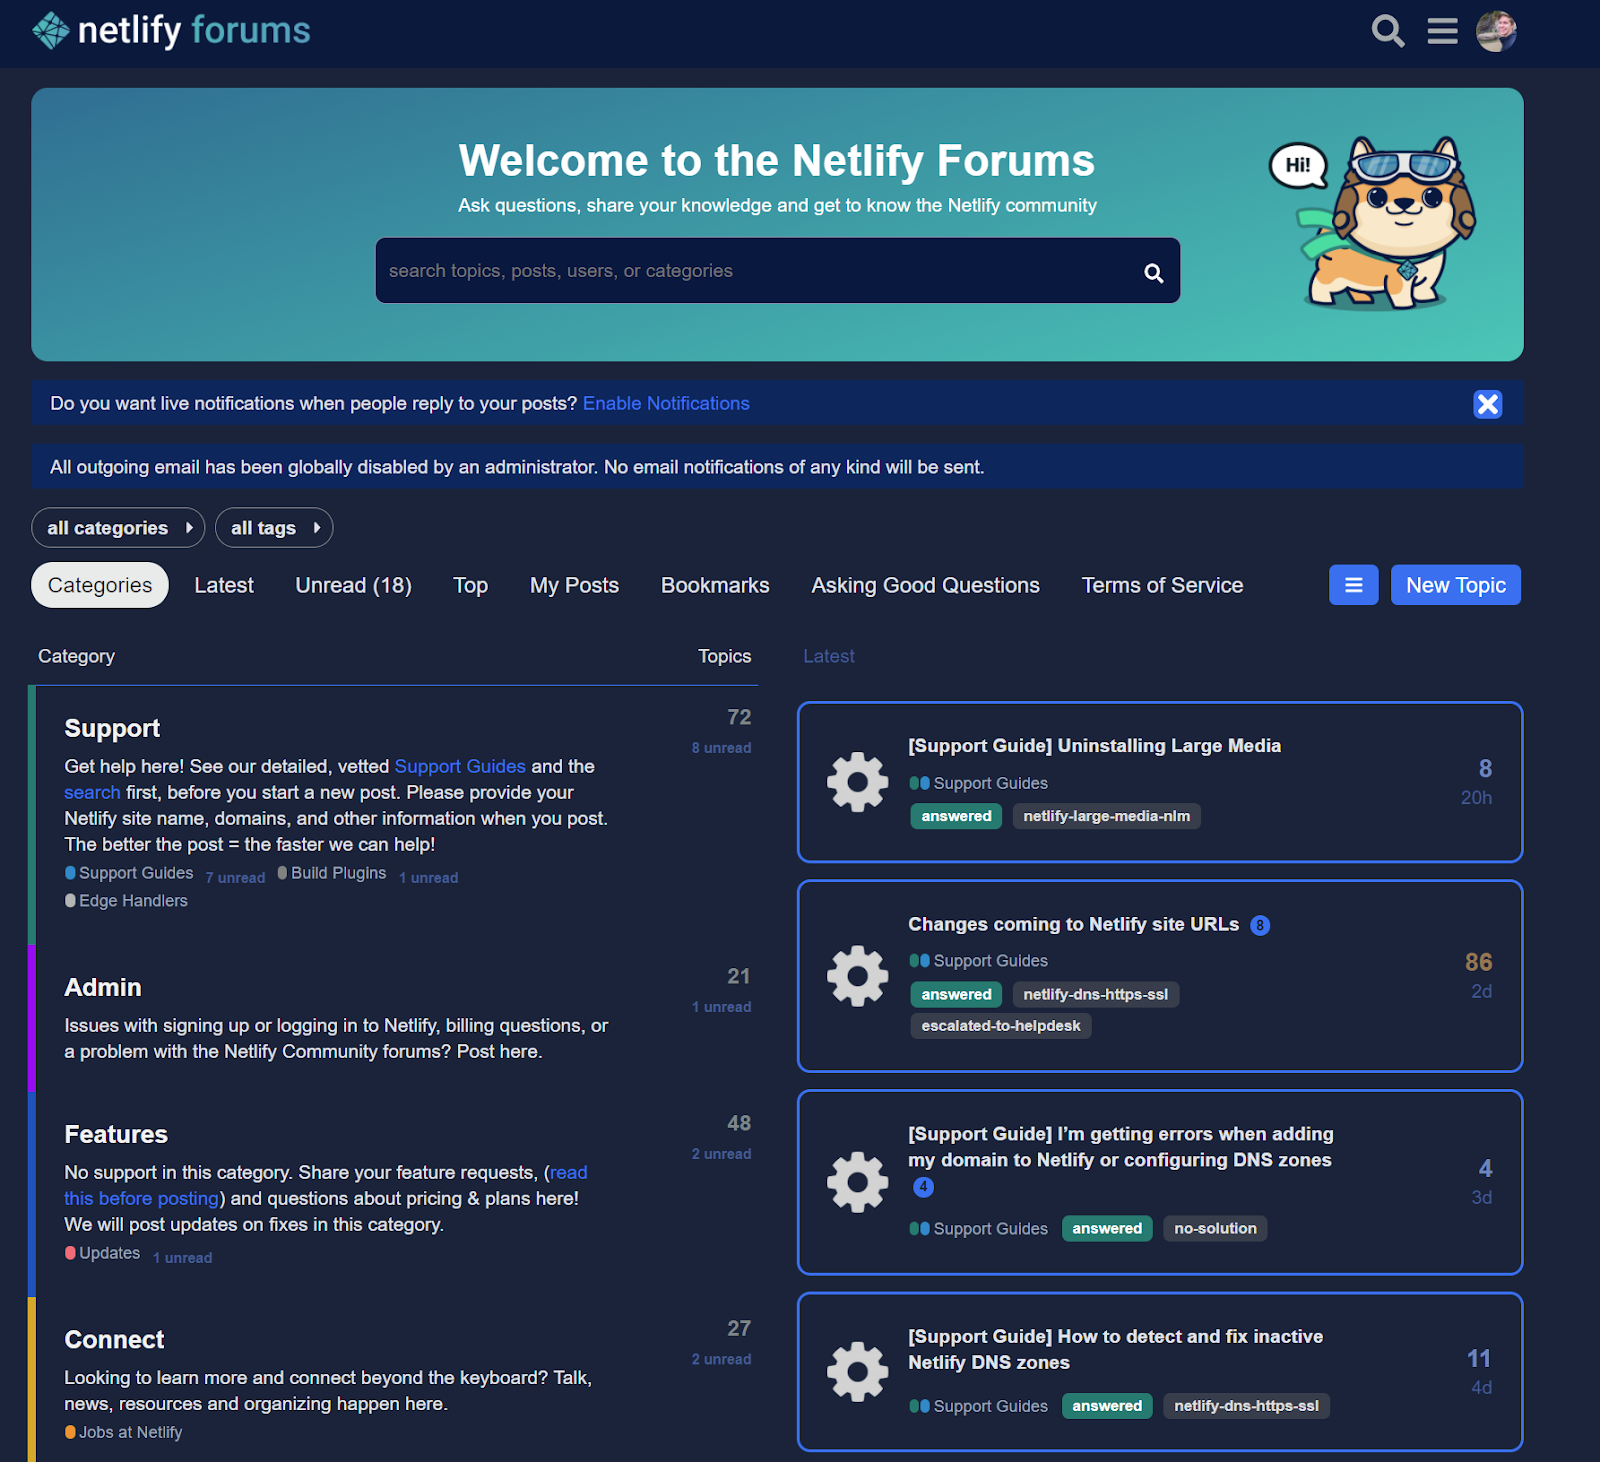 This image contains the Netlify Forums landing page. It is a dark blue page with a light teal box in the top third. The box contains text that reads "welcome to the Netlify Forums" with a search bar below. To the right is Saavy the dog, smiling and saying hello. In the middle and lower thirds are the discussion categories. From top to bottom these are "support, admin, features, and connect." On the left, there are examples of the most recent media shared. For example, "support guide: uninstalling large media."